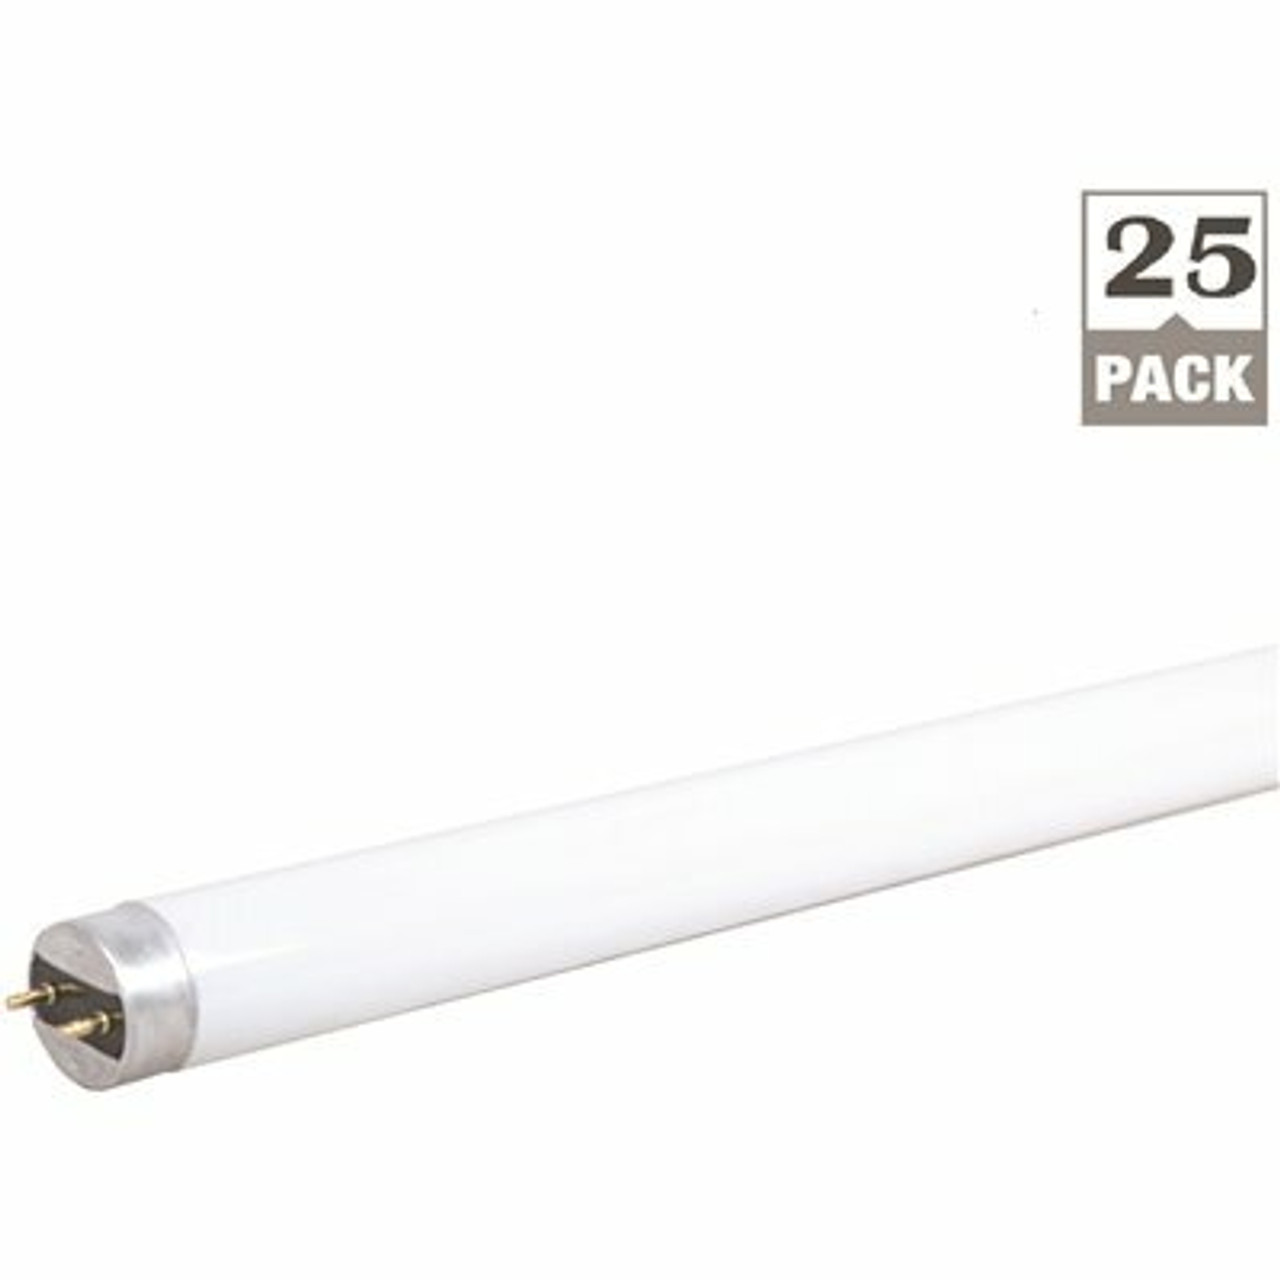 17-Watt Equivalent 8-Watt 2 Ft. Linear T8 Led Non-Dimmable Plug And Play Light Bulb Type A Bright White (25-Pack)